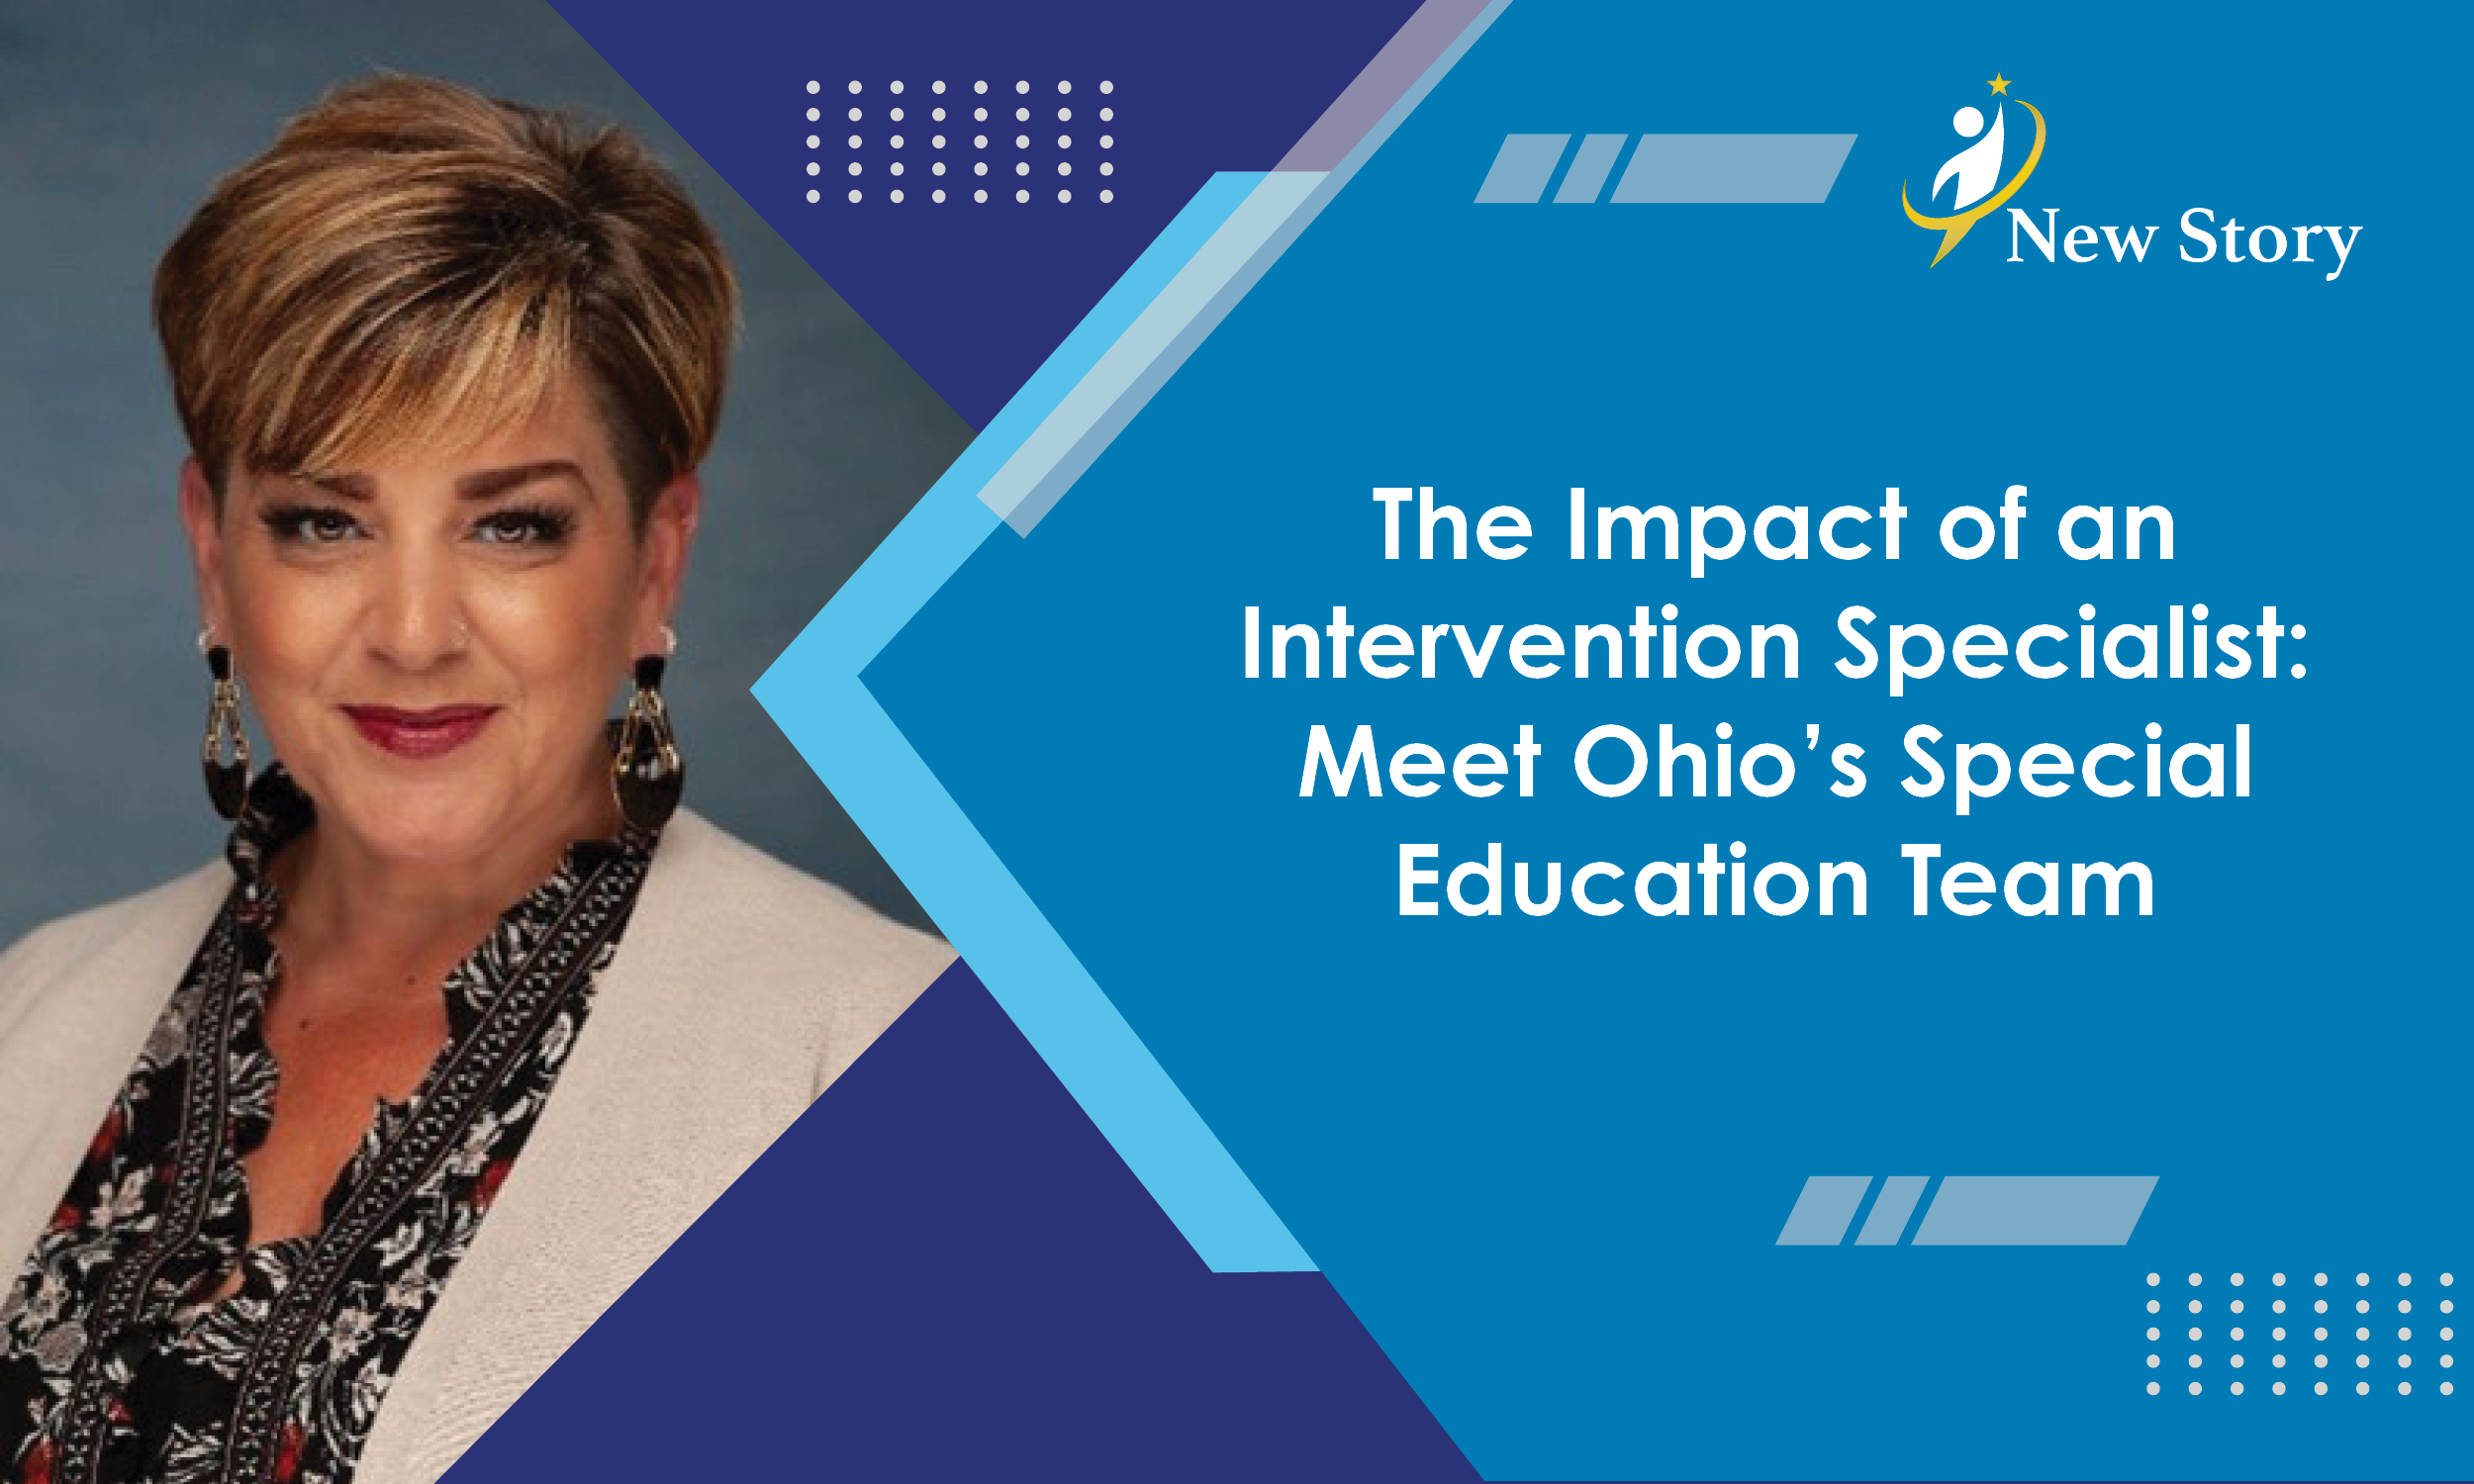 The Impact of an Intervention Specialist: Meet Ohio’s Special Education Team